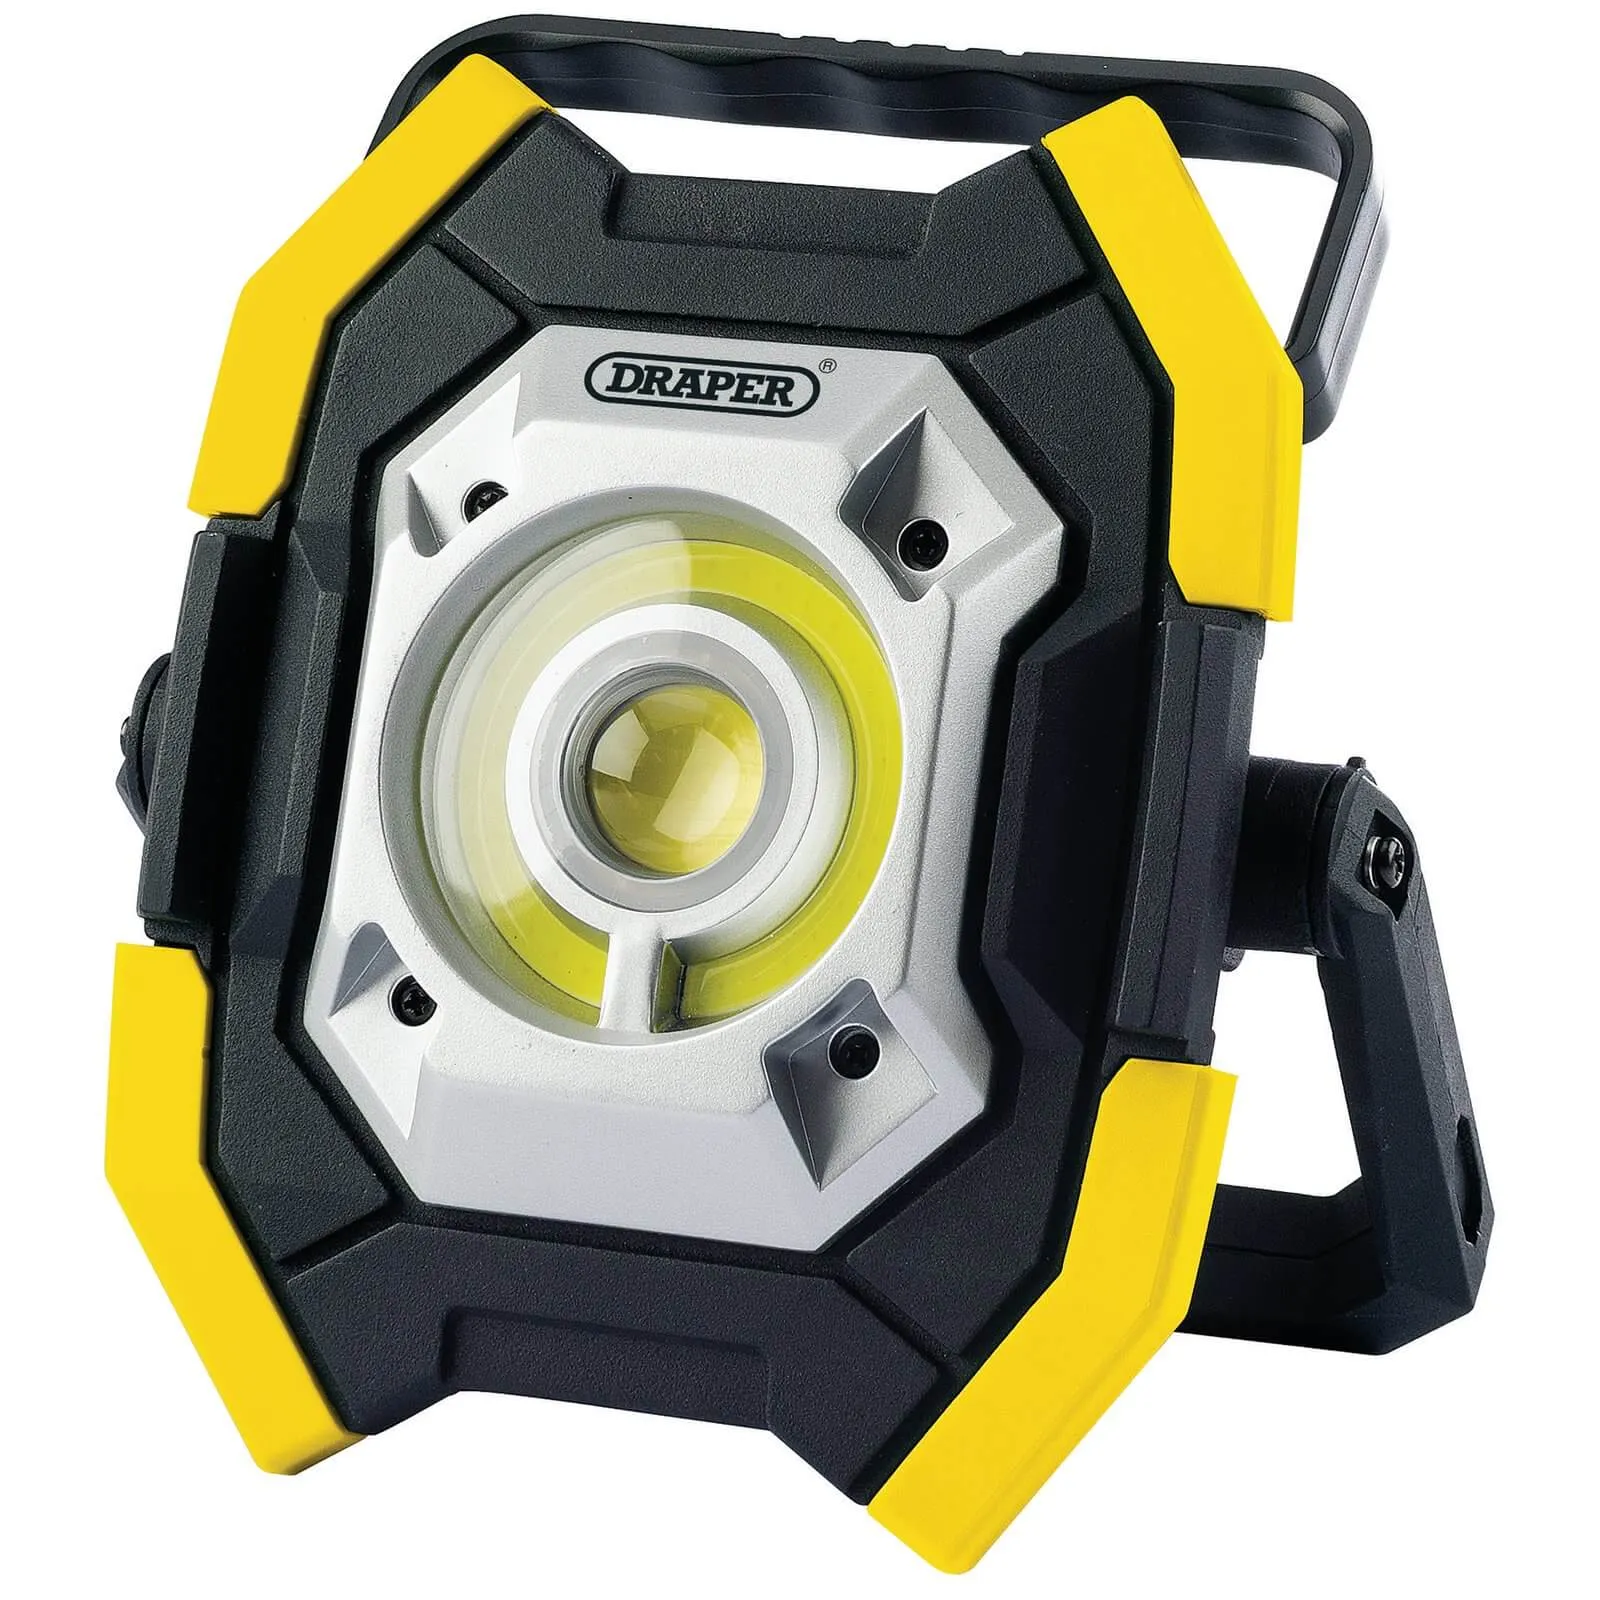 Draper Twin Cob LED Rechargeable Worklight - Yellow